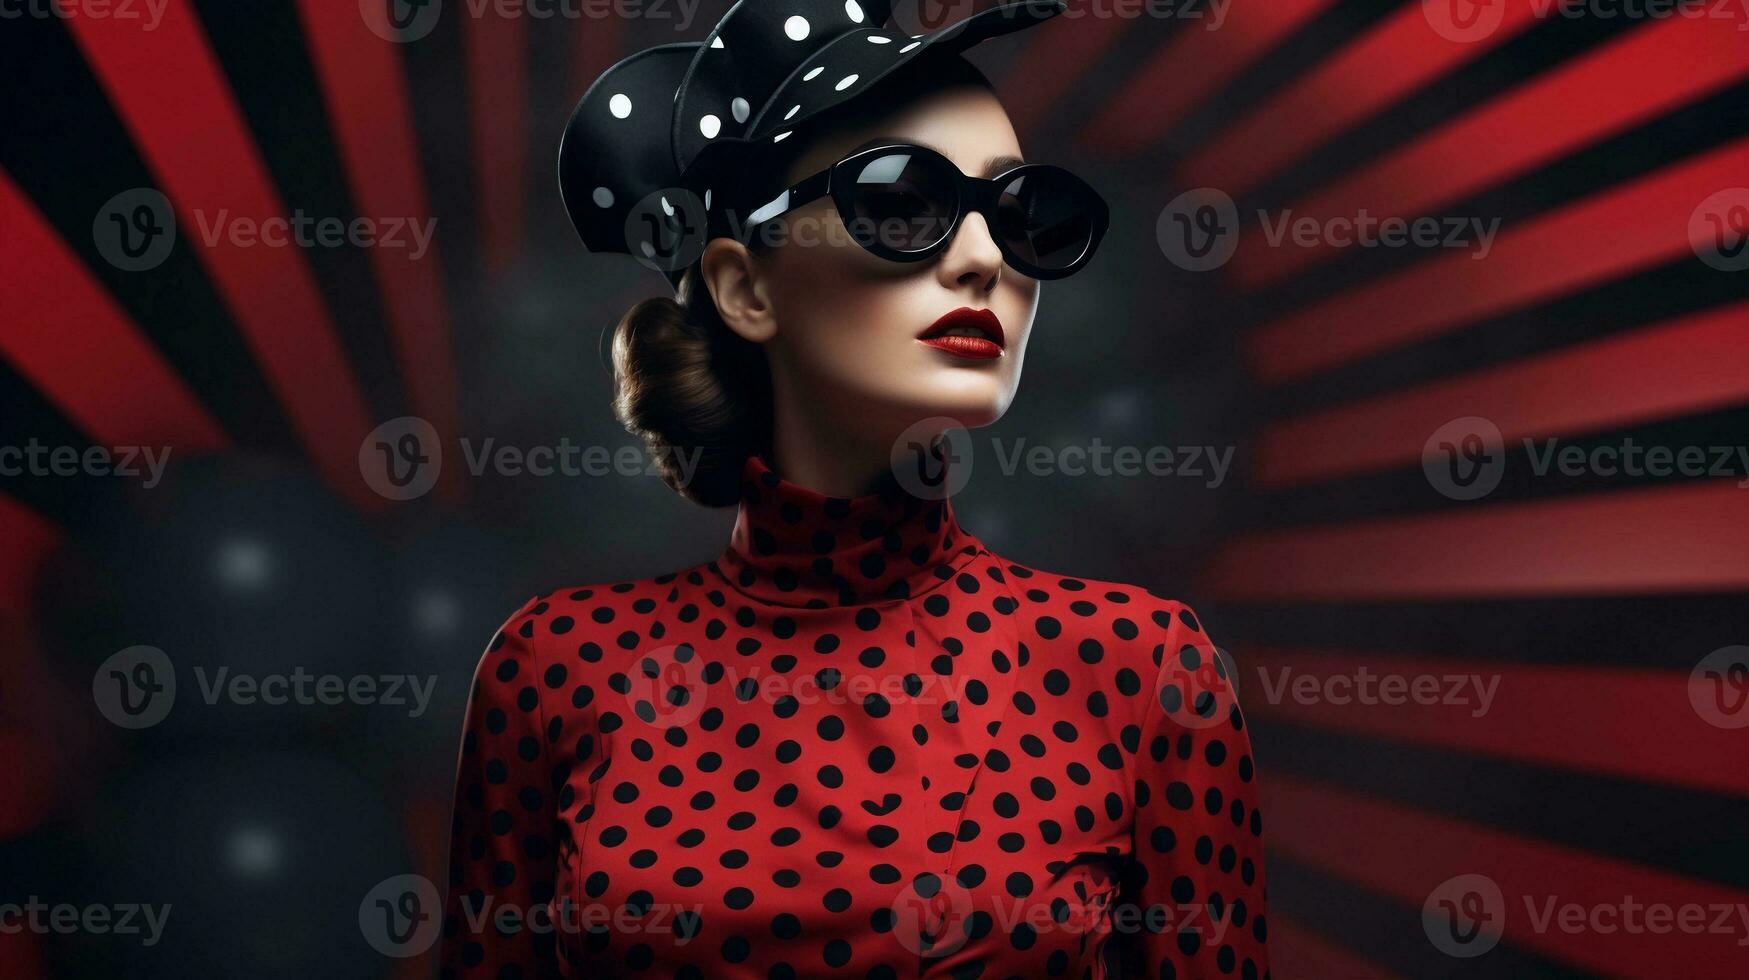 An image featuring a stylish outfit or accessory adorned with polka dots, space for text, background image, generative AI photo